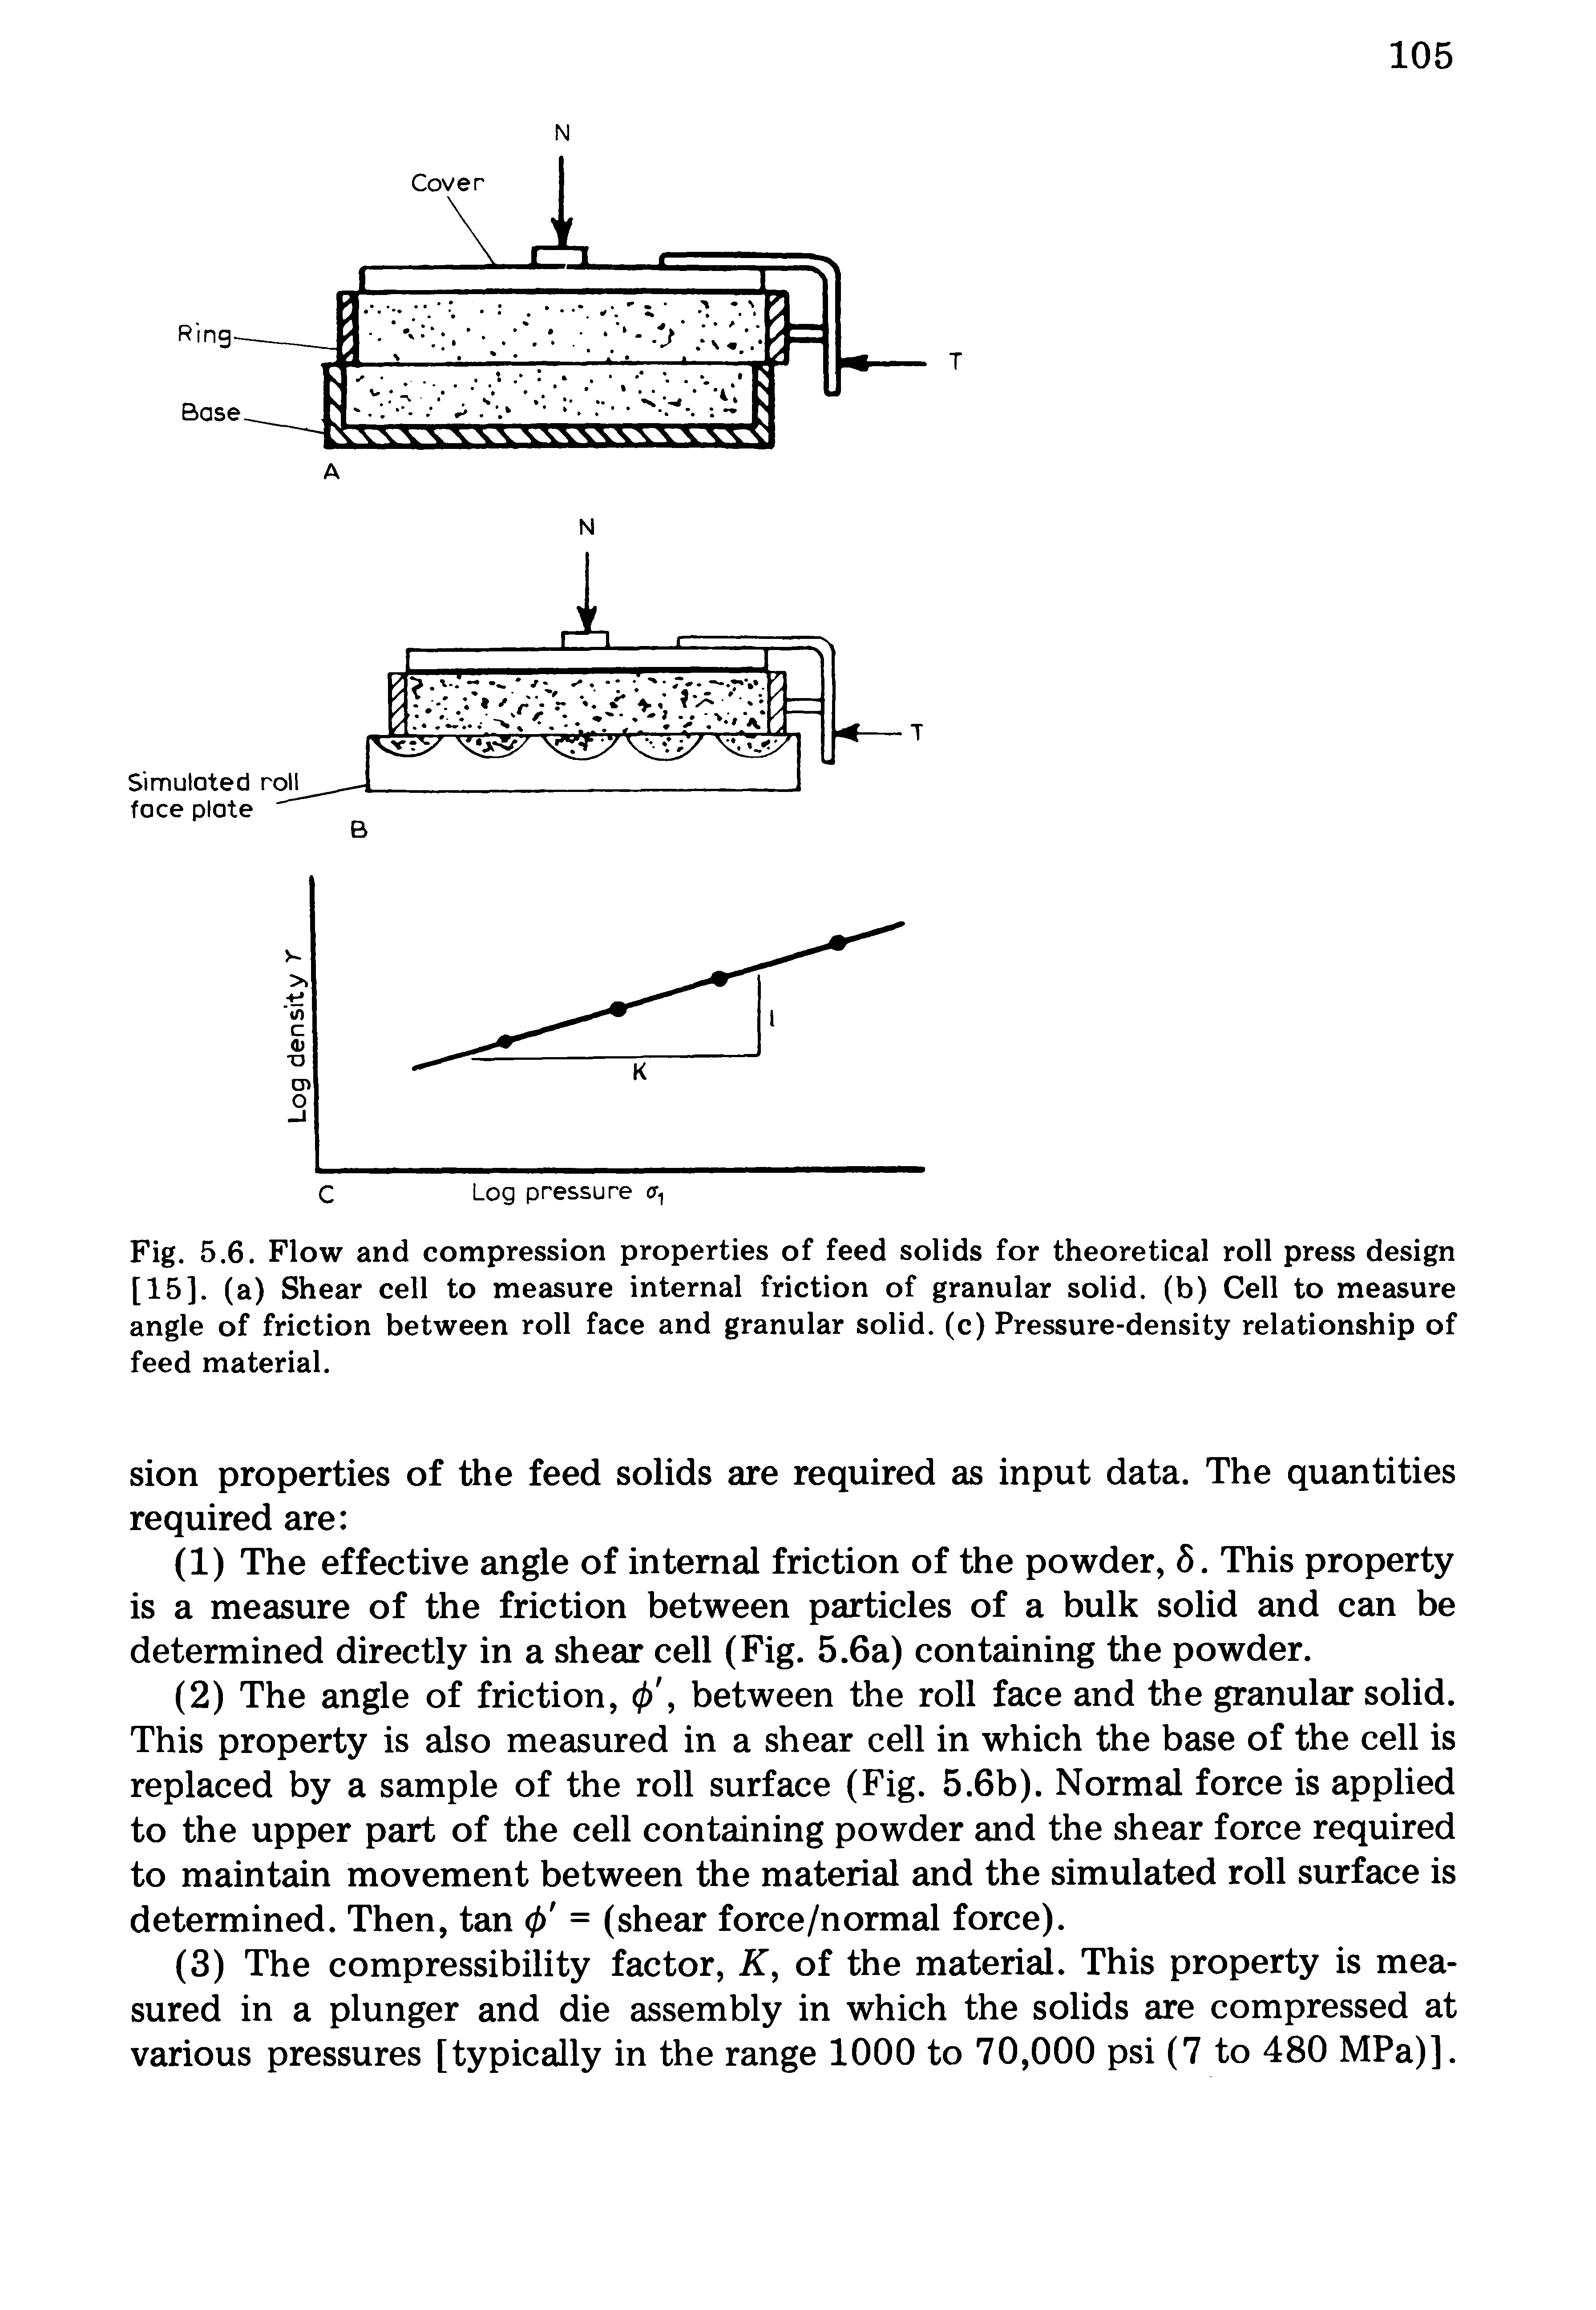 Fig. 5.6. Flow and compression properties of feed solids for theoretical roll press design [15]. (a) Shear cell to measure internal friction of granular solid, (b) Cell to measure angle of friction between roll face and granular solid, (c) Pressure-density relationship of feed material.